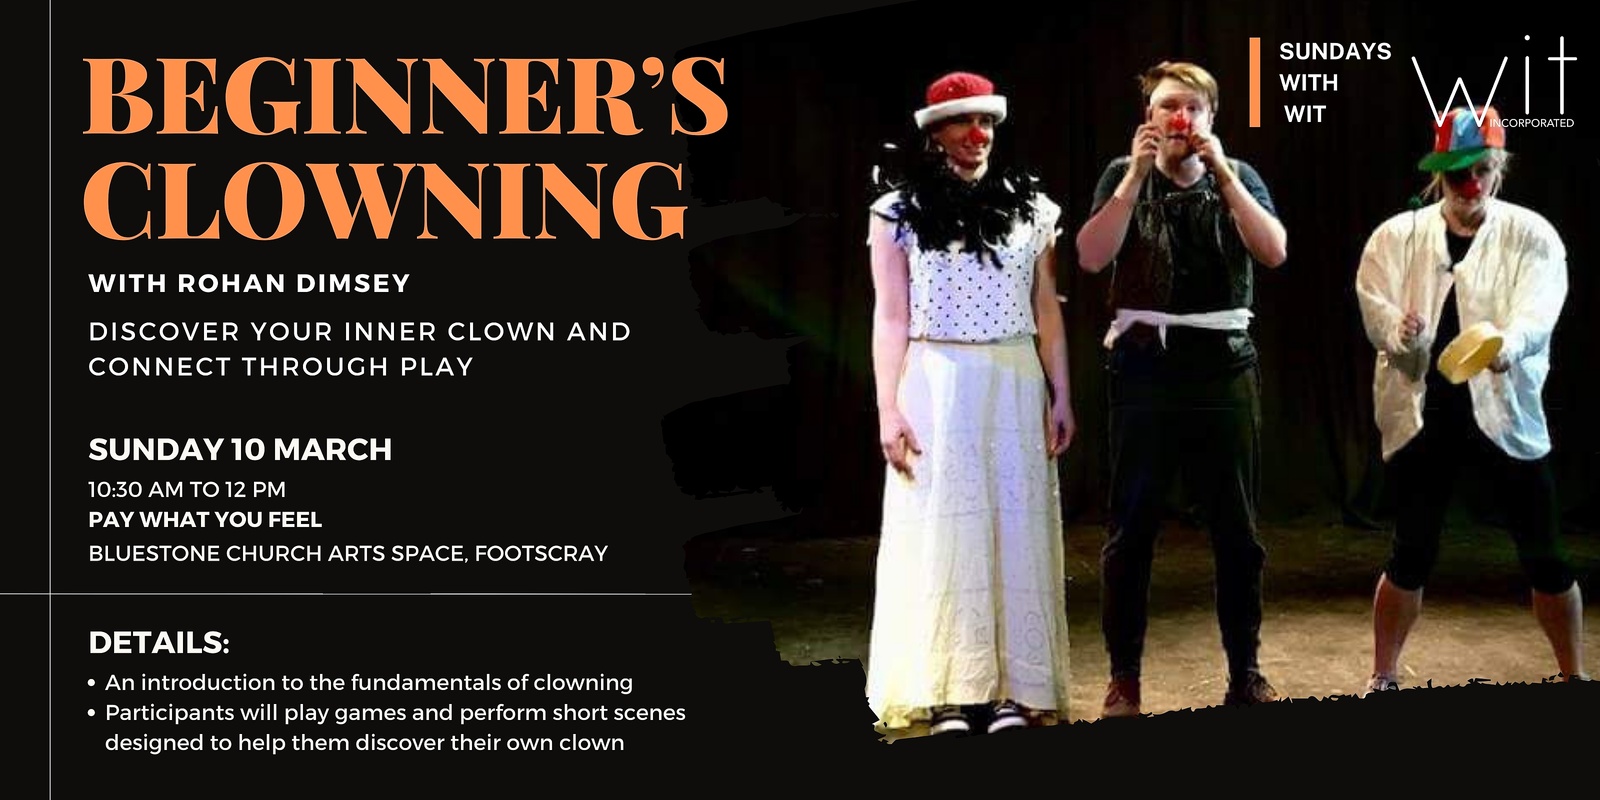 Banner image for Sundays with Wit - Beginner's Clowning